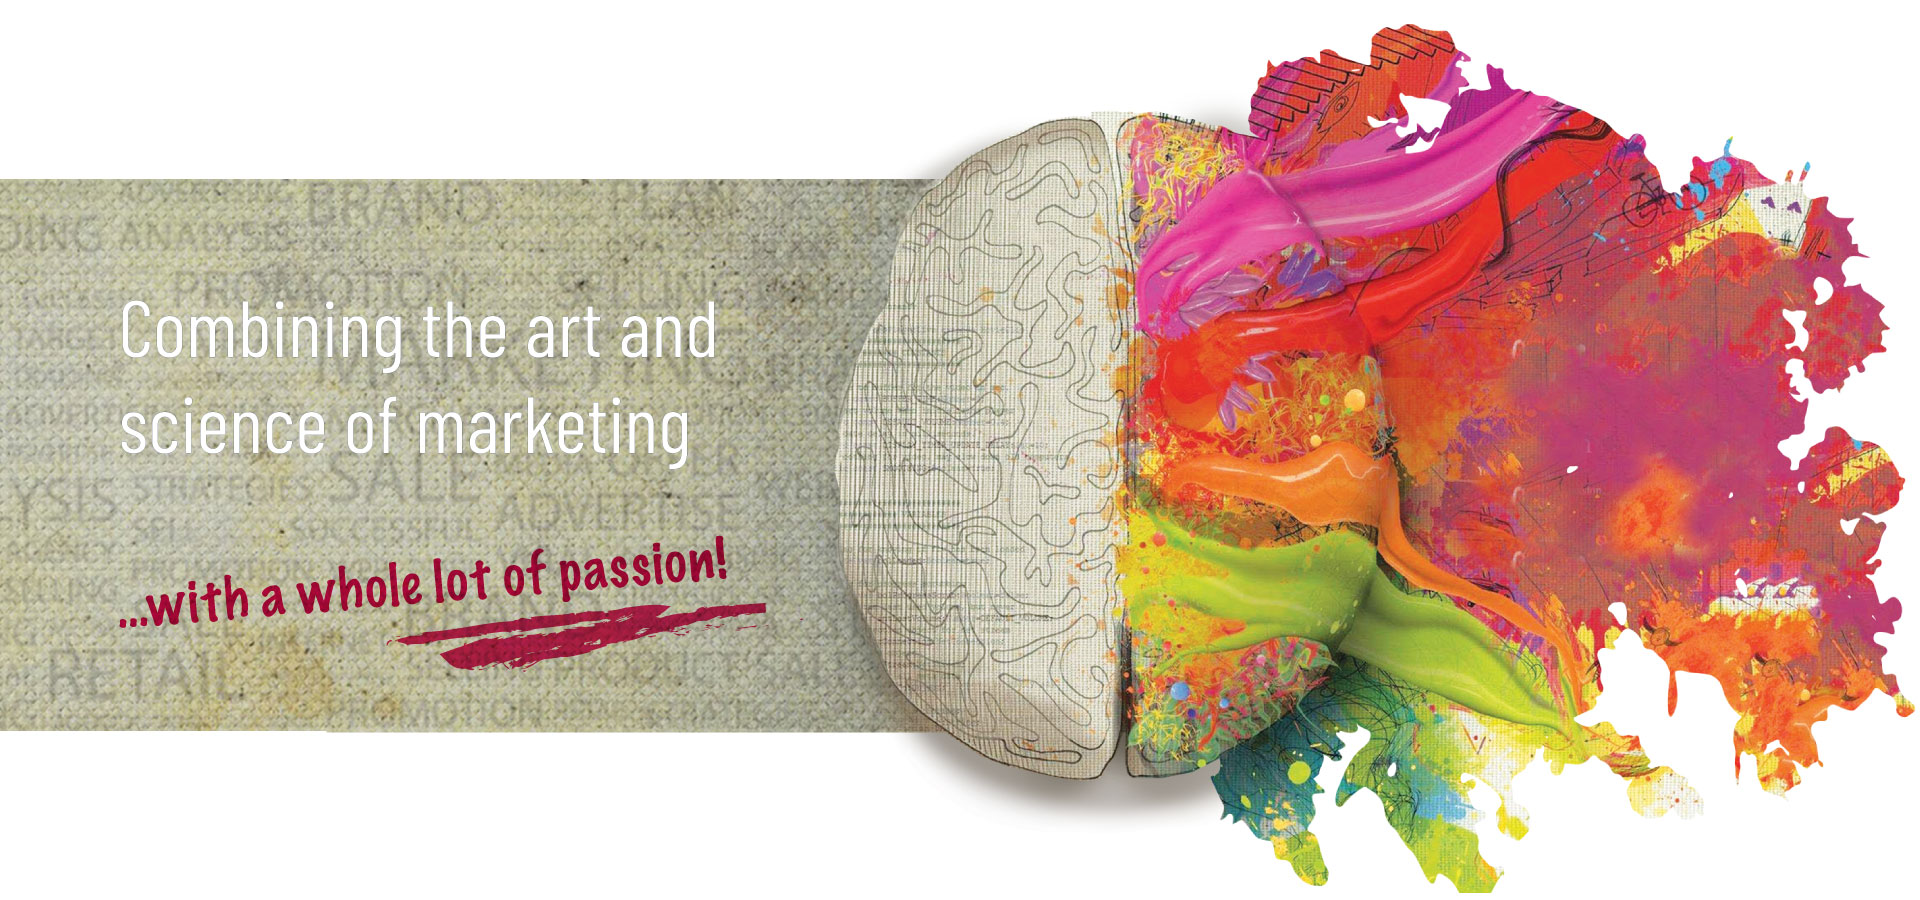 We combine the art and science of marketing...with a whole lot of passion!